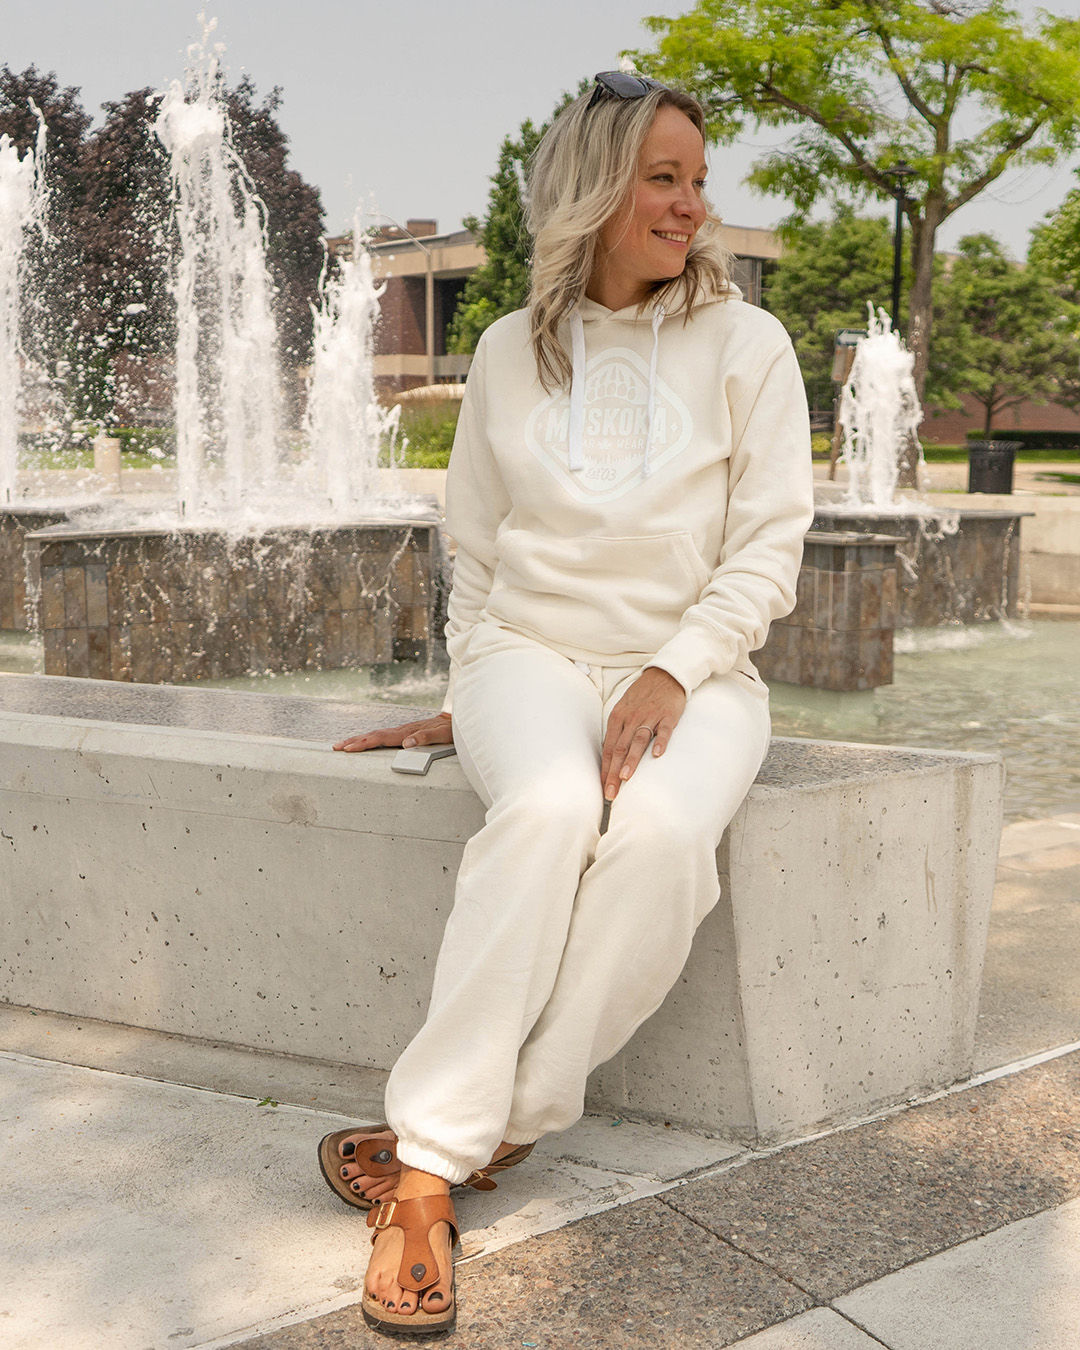 Canadian Woman sitting in front of fountain in Galt, Ontario wearing a matching Ivory sweater and sweatpants outfit